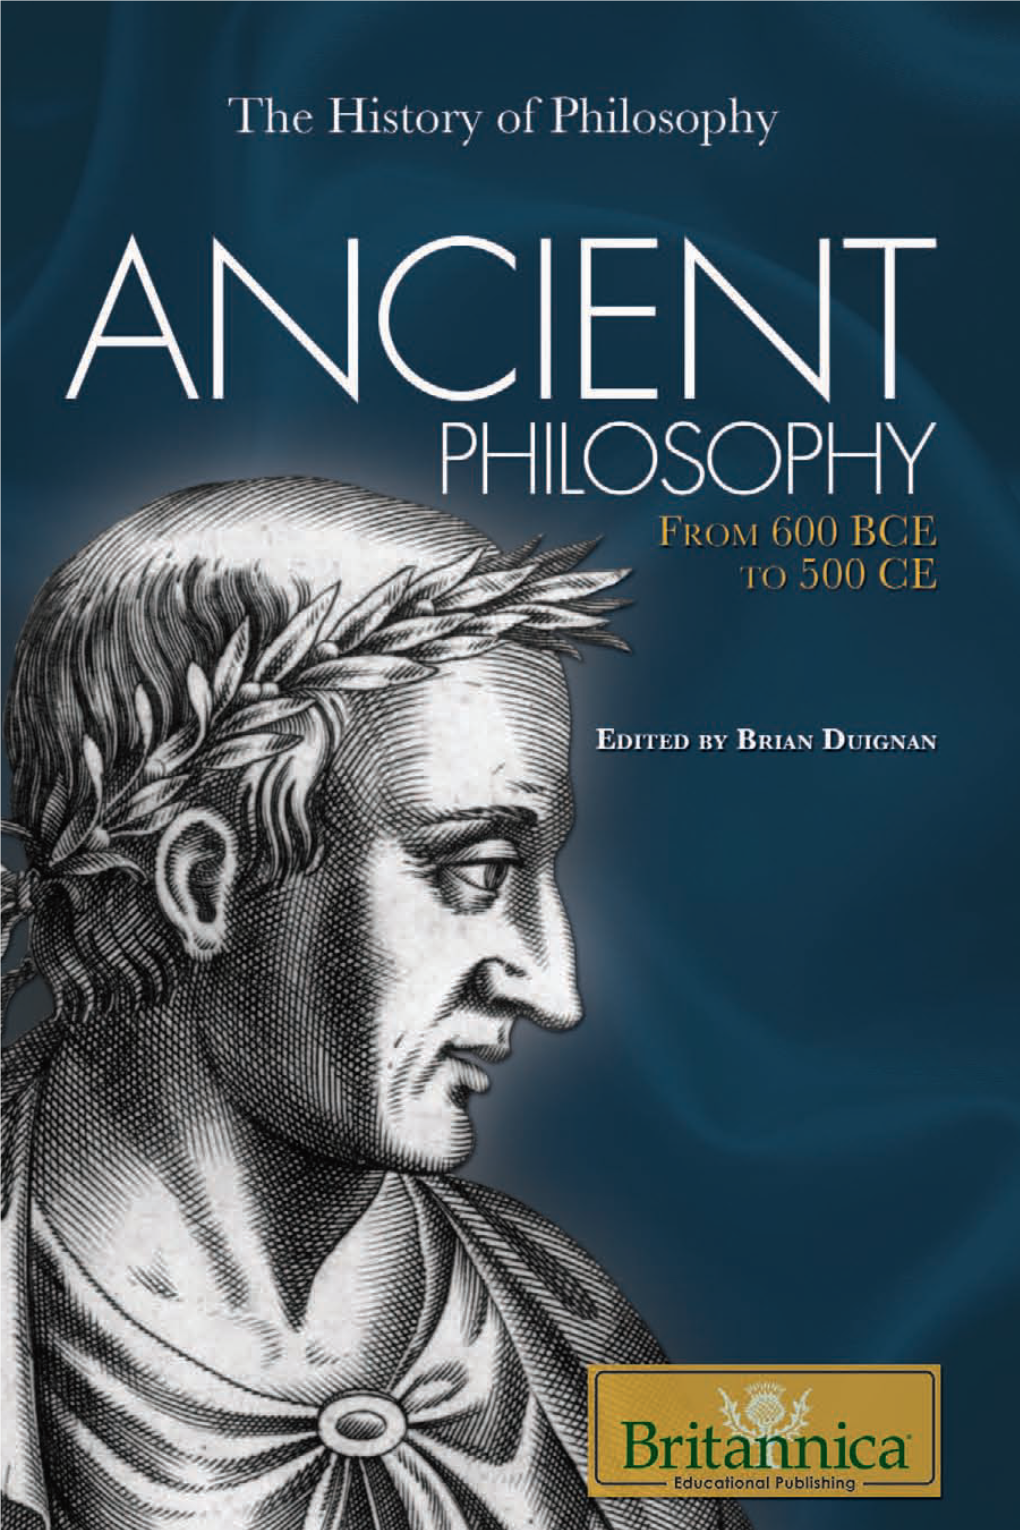 Ancient Philosophy: from 600 BCE to 500 CE / Edited by Brian Duignan